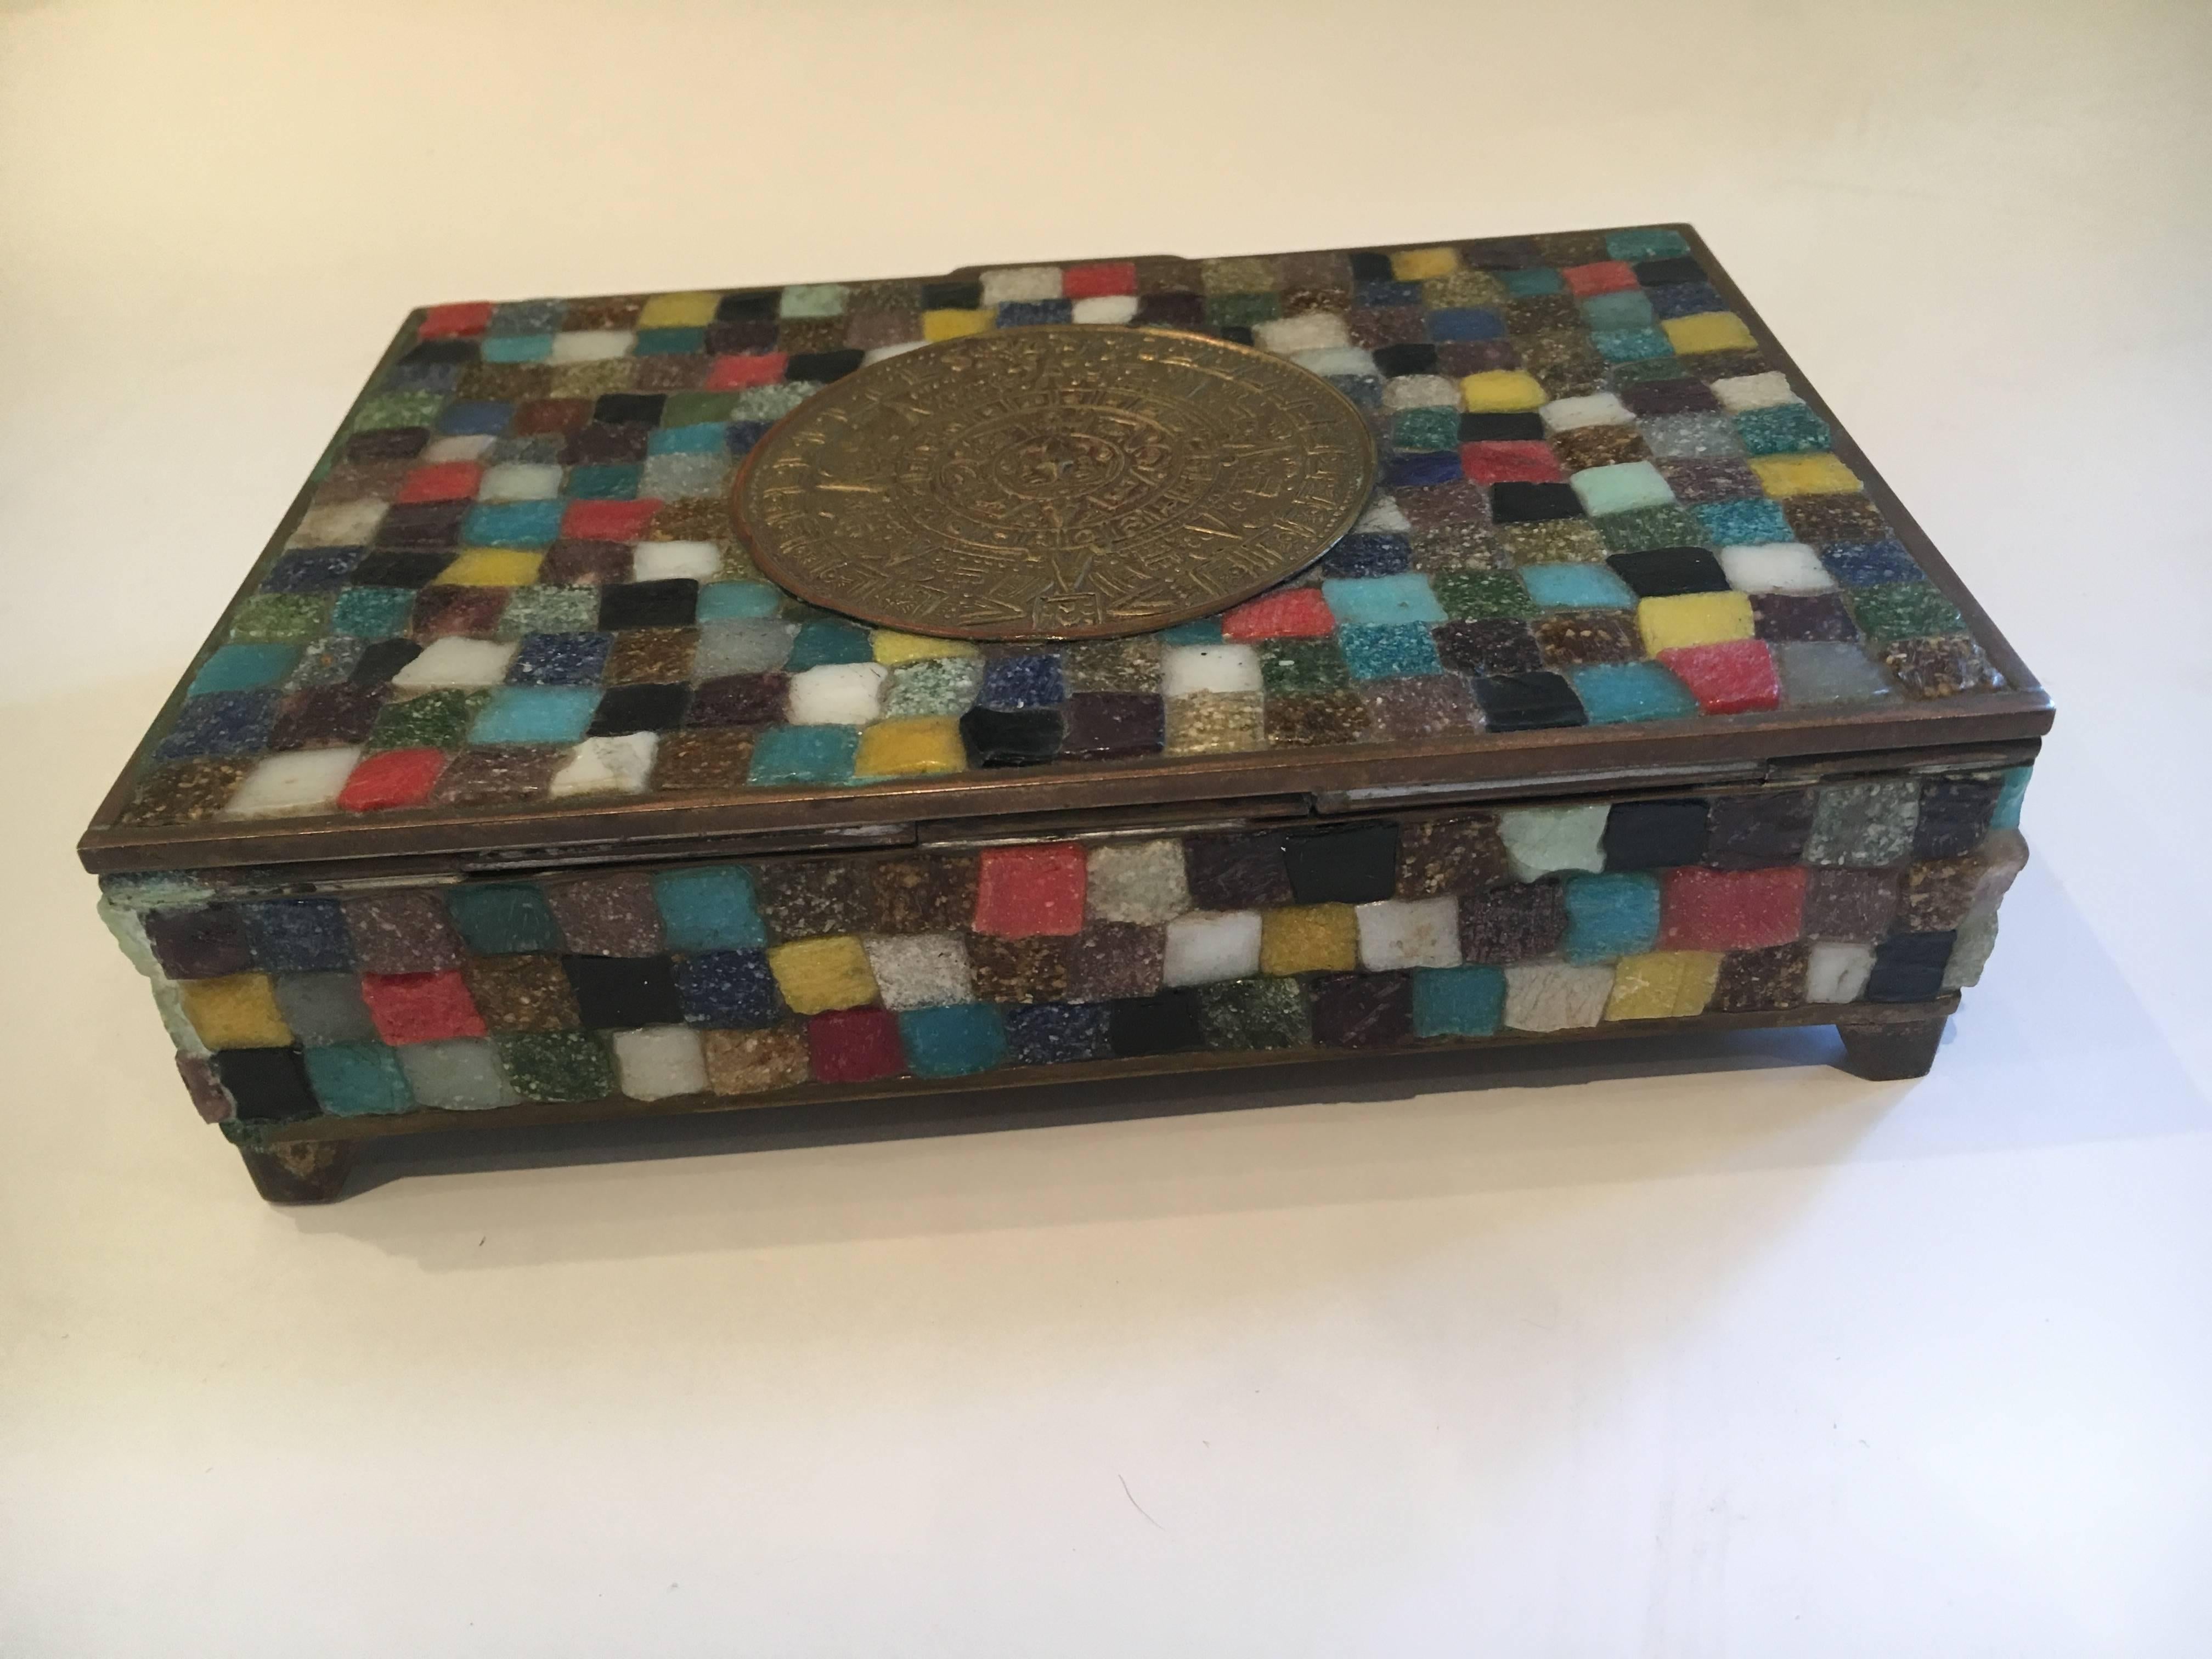 Two beautiful brass and glass mosaic boxes by renowned artist Salvador Teran (Mexico 1920-1974). Teran was a designer/innovator in making jewelry and mosaics and was a founding member of Los Castillos, the legendary Taxco artisans. The multi-colored